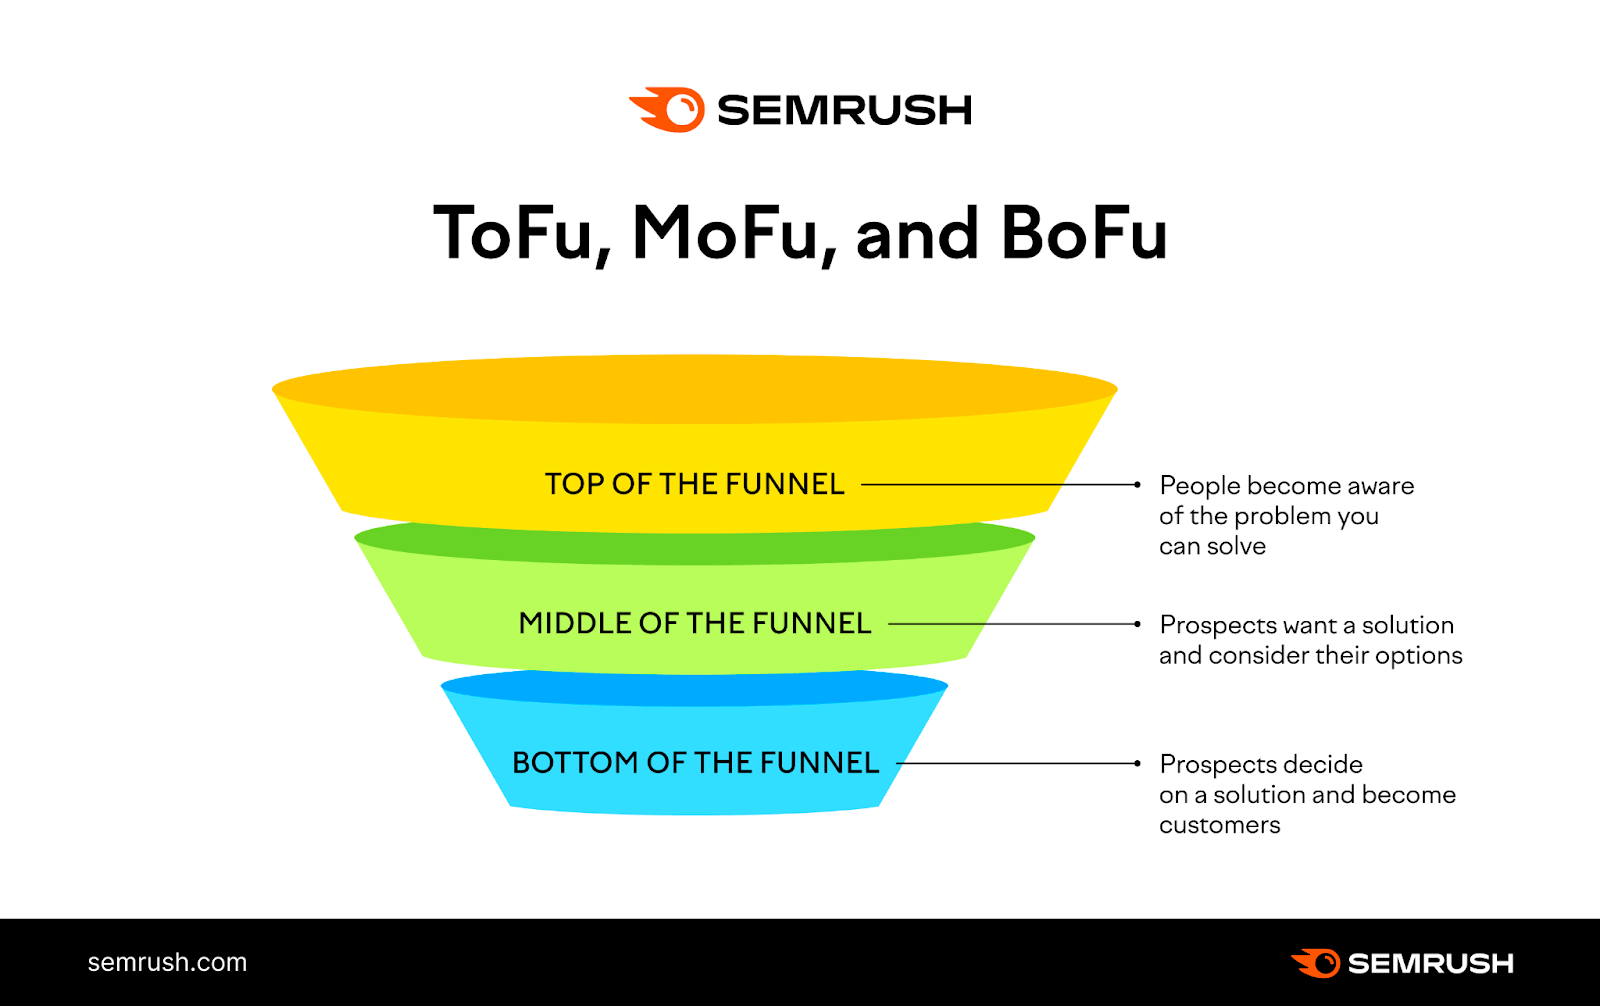 A visual representation of the content marketing funnel